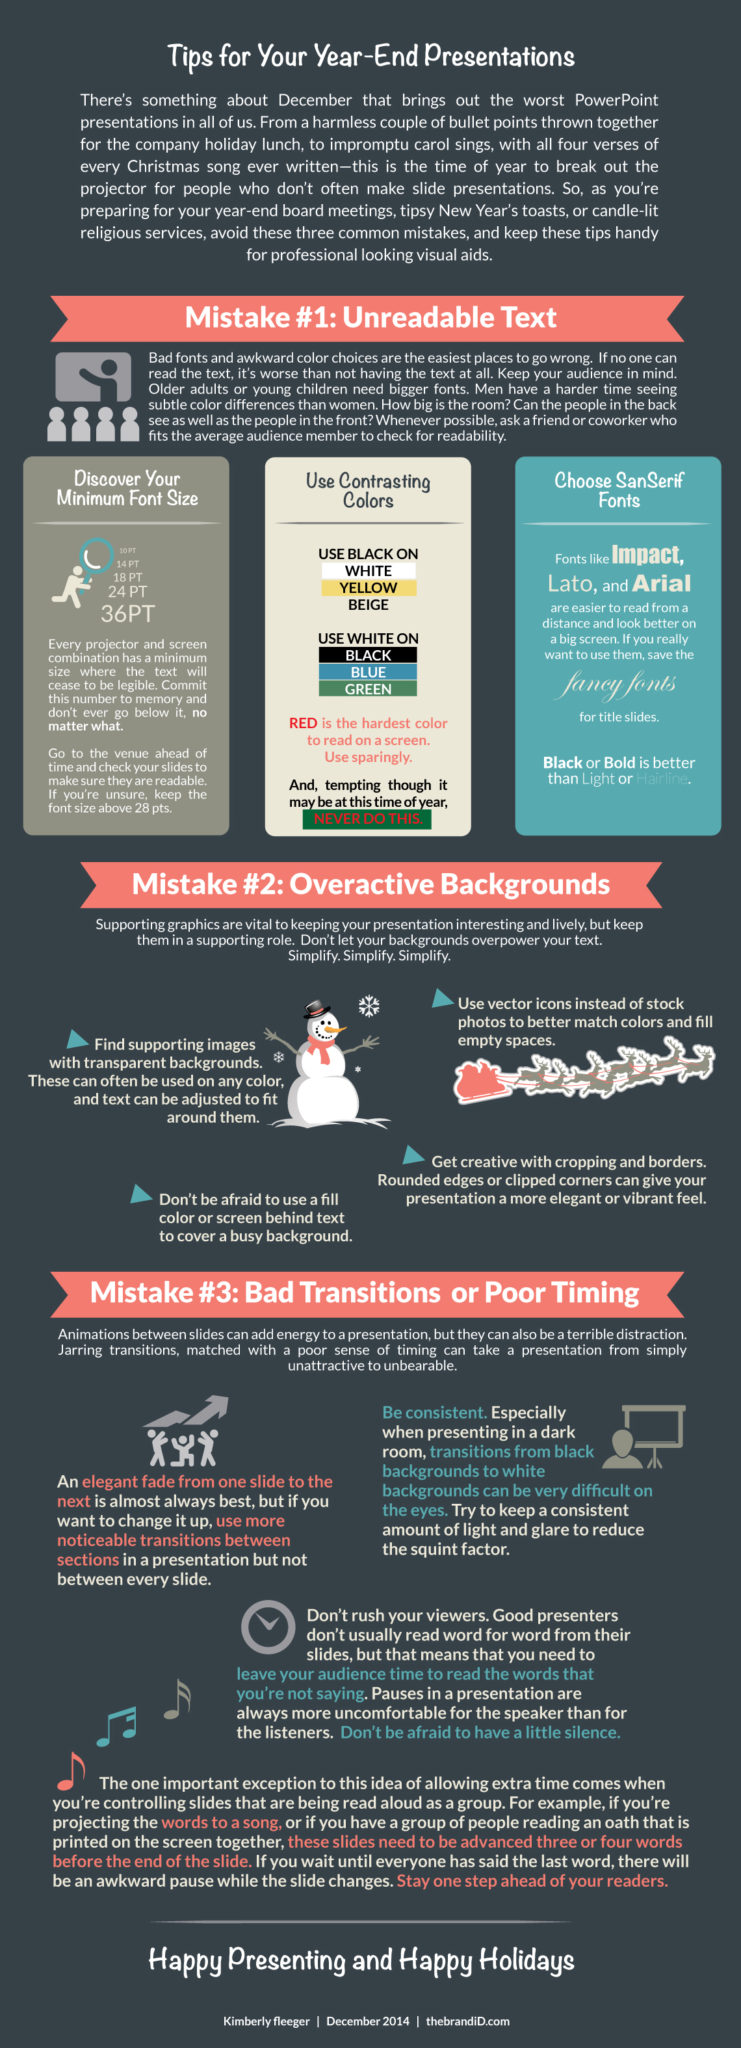 PPT_infographic_final